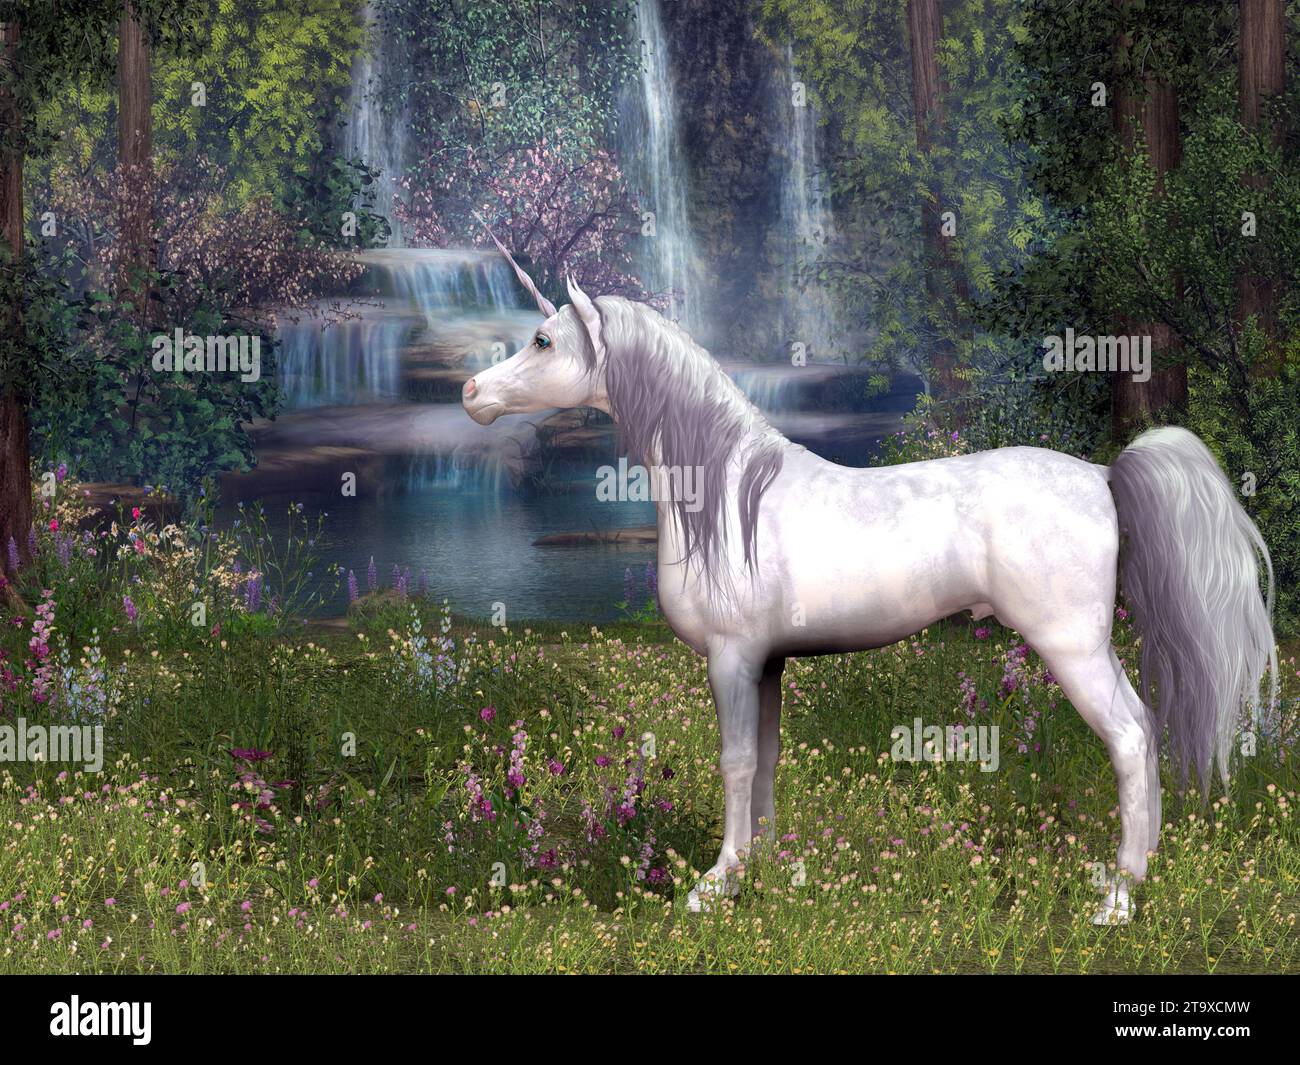 A magical white Unicorn stallion stands in front of a forest pond with waterfalls of gleaming water. Stock Photo